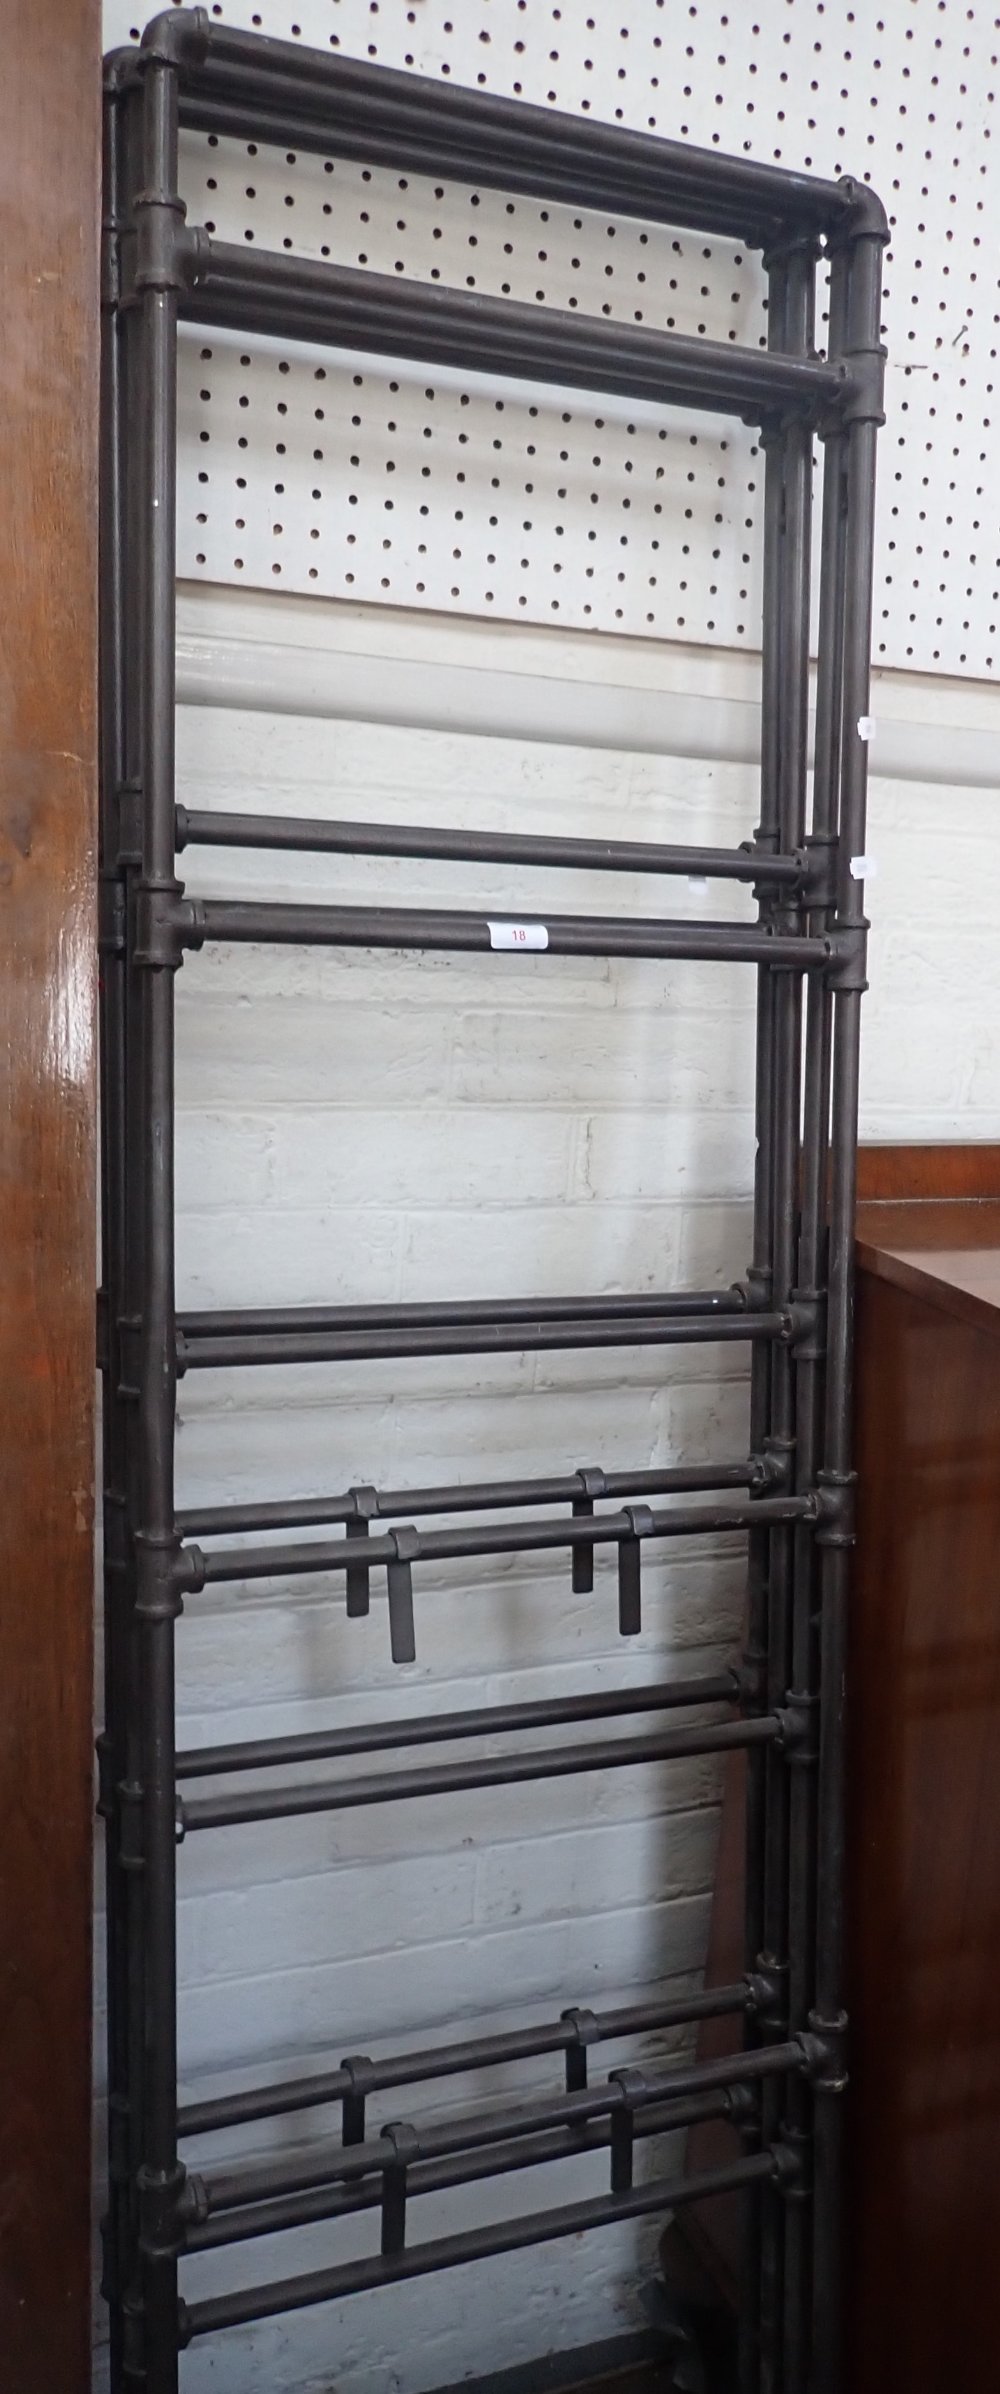 A PAIR OF TWO-FOLD DISPLAY STANDS made from metal pipes, in the industrial style, 180cm high x